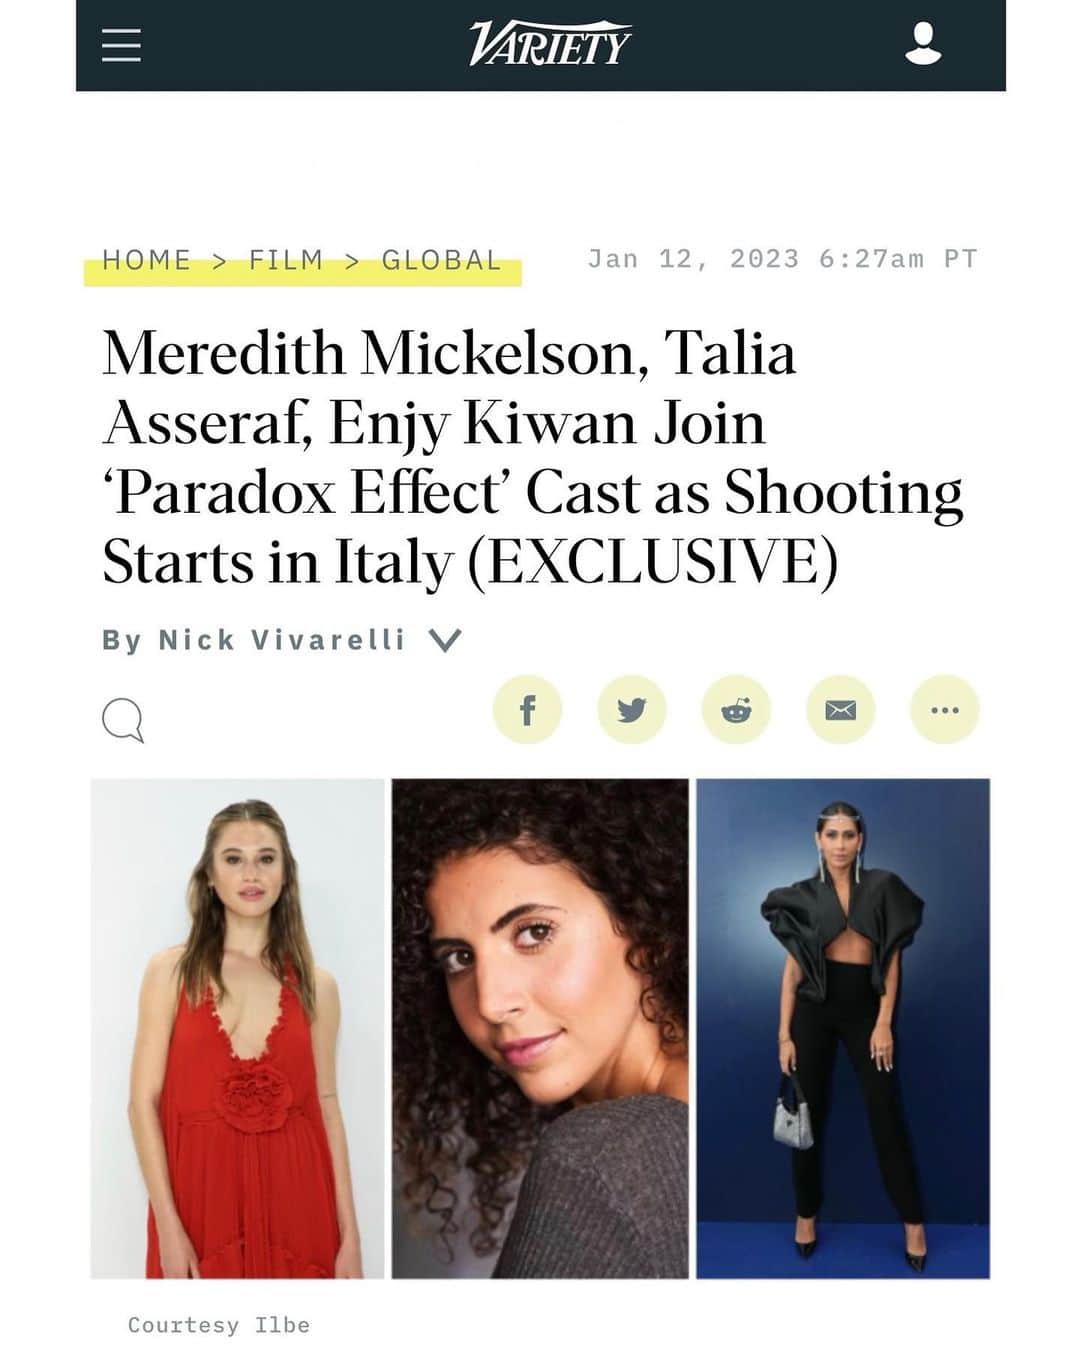 MEREDITH MICKELSONのインスタグラム：「beyond over the moon to work with the incredible director / producers of this film @scottweintrob  @andreaiervolinoproducer @ladymonikabacardi  & Cast- Harvey Keitel, @olgakurylenkoofficial @olivertrevena @enjykiwan @taliaasseraf & rest of cast / crew & Writers Samuel Bartlett, Ferdinando Dell’Omo, and Andrea Iervolino !!!! 🥰❤️😍」